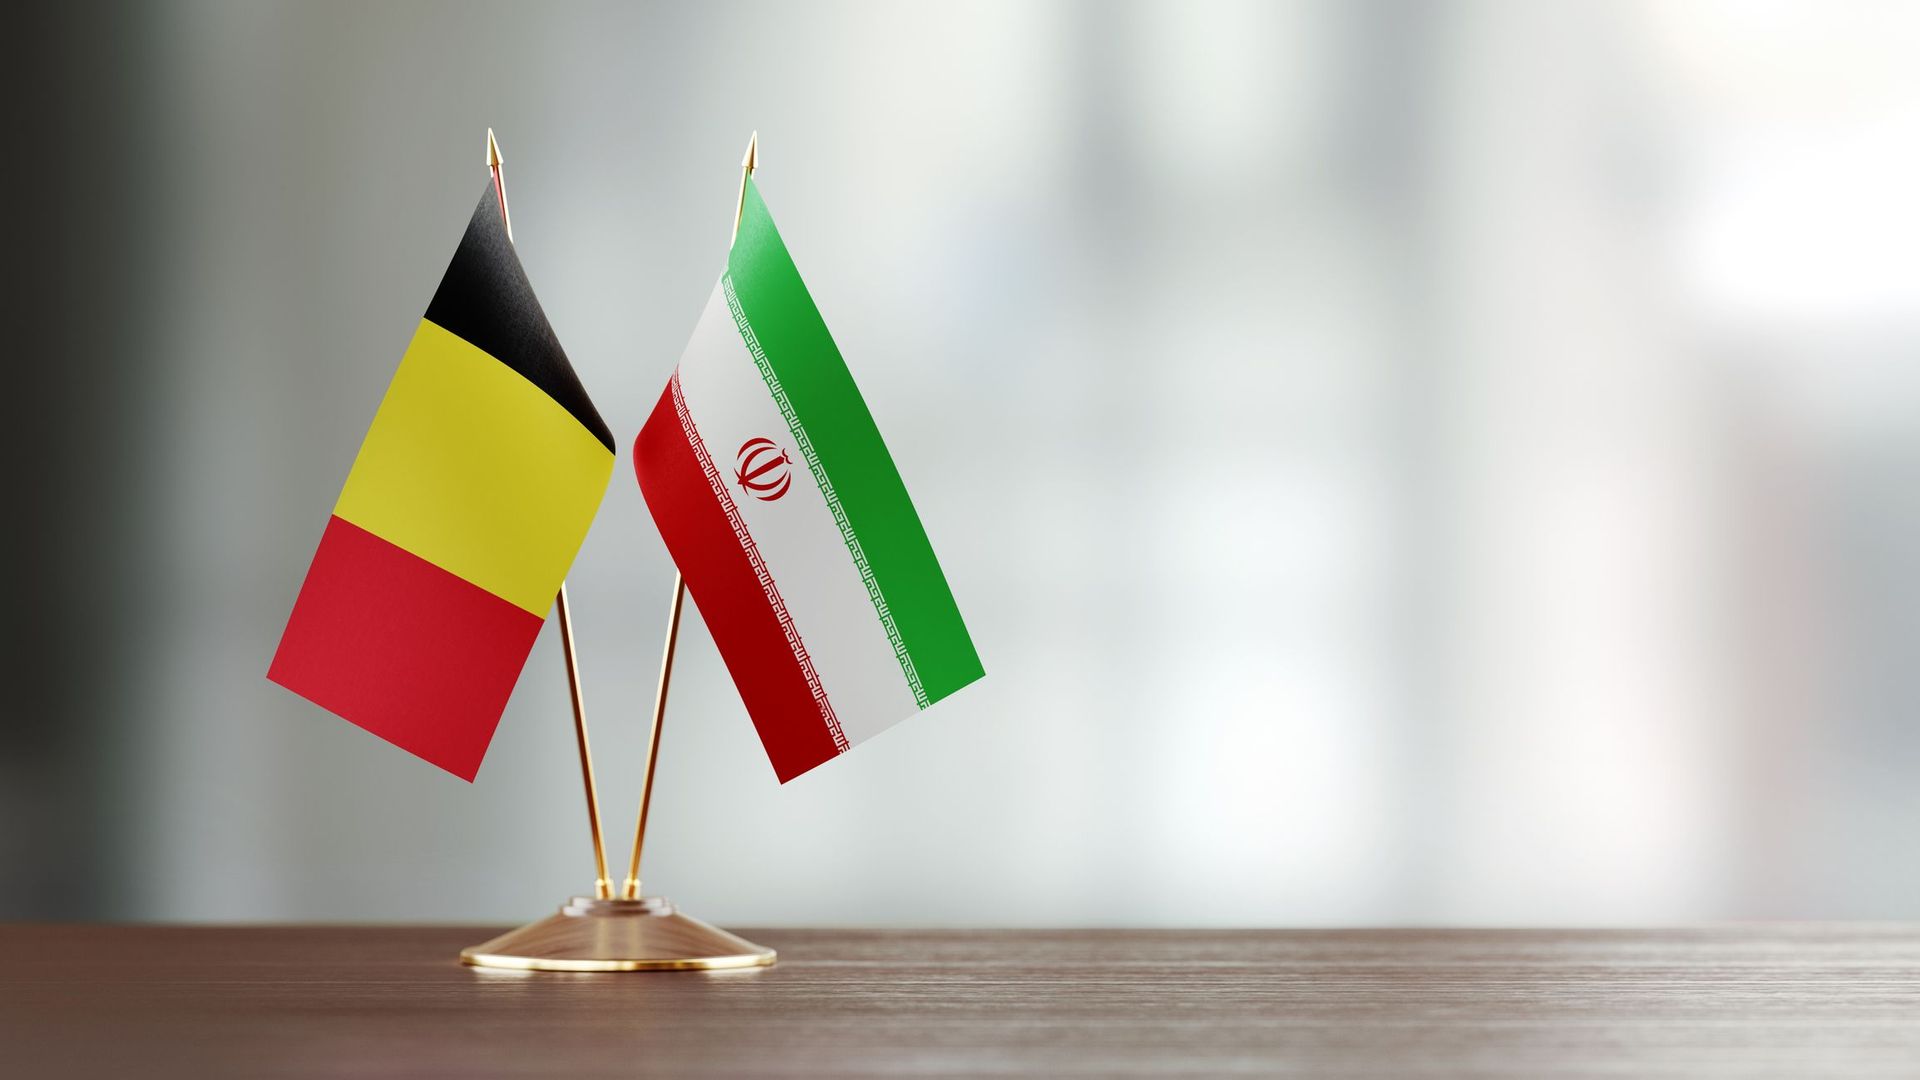 Belgian And Iranian Flag Pair On A Desk Over Defocused Background